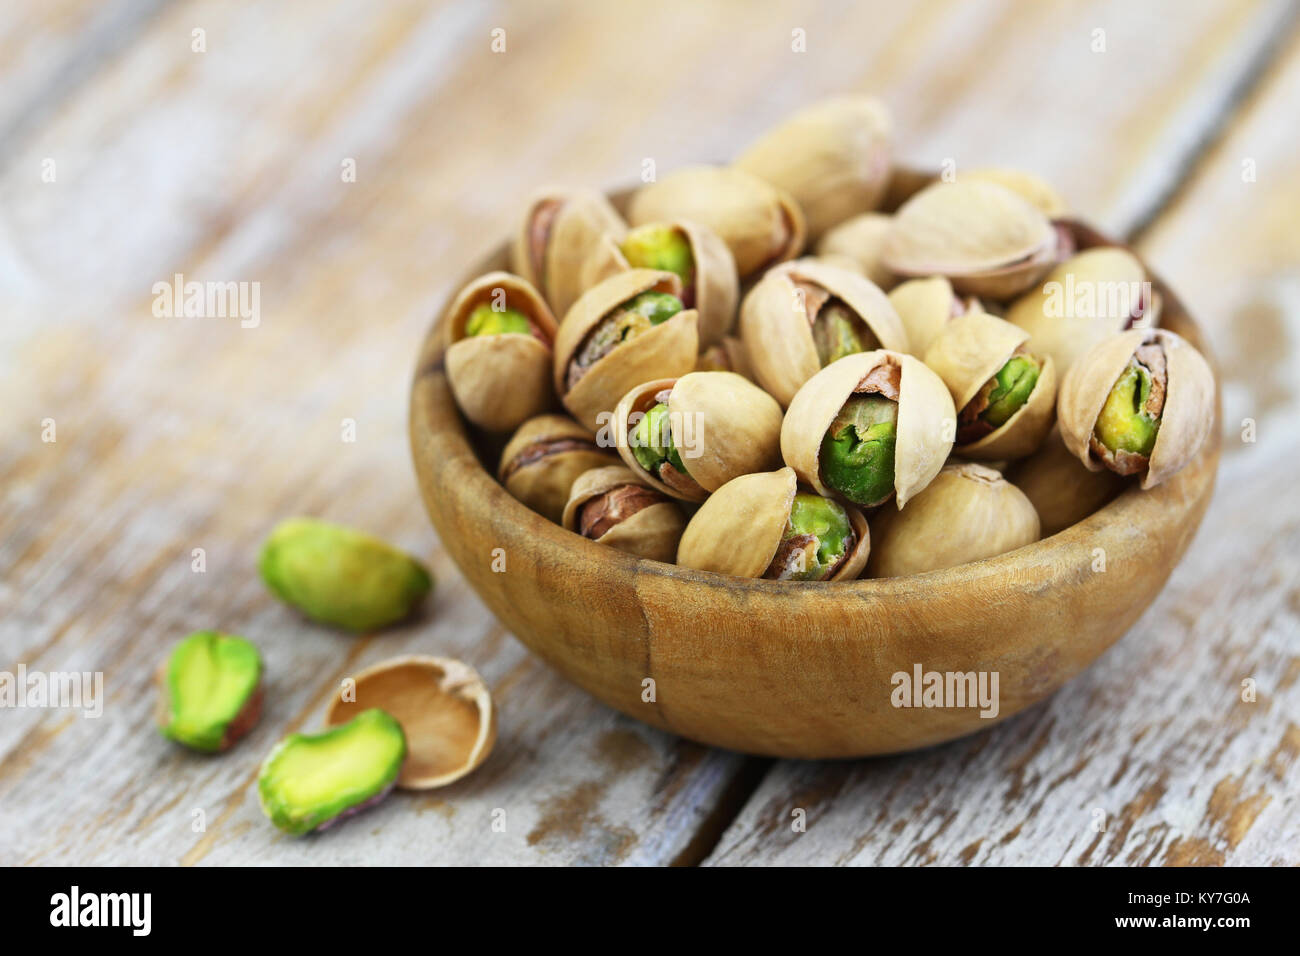 Pistachios with and without shell in bamboo bowl on rustic wooden surface Stock Photo